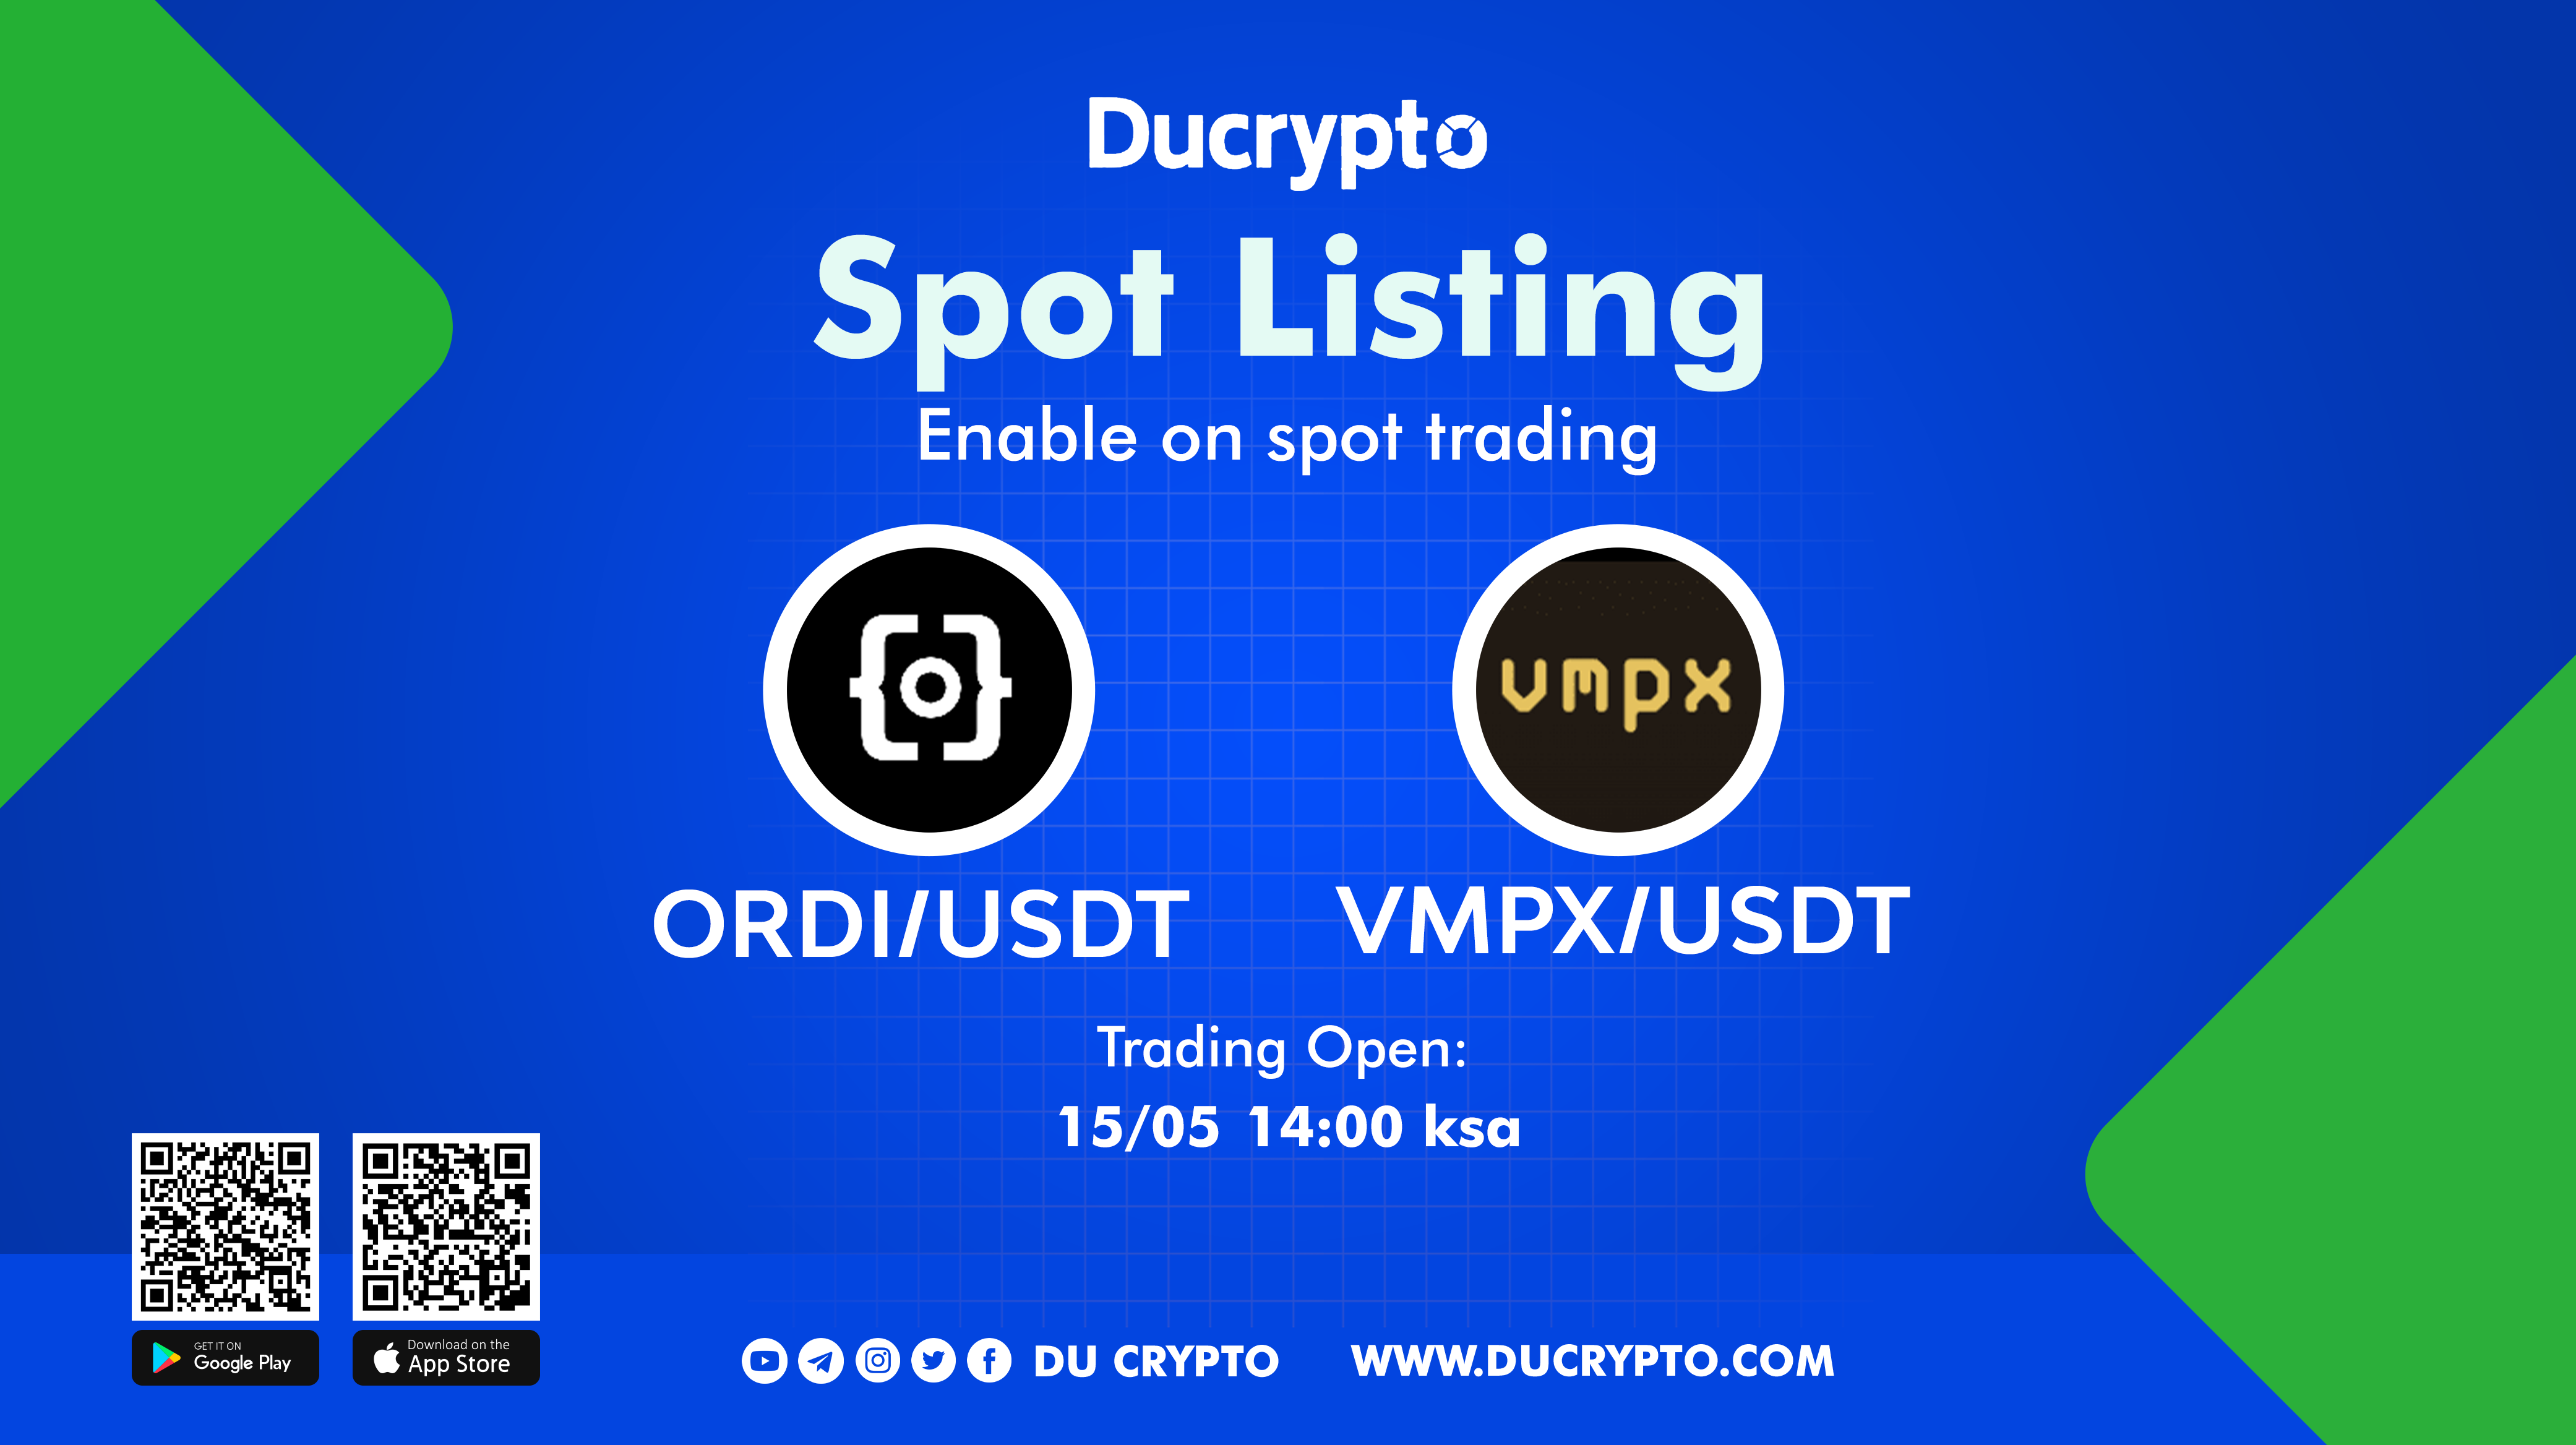 Announcement on listing of 2 spot trading pairs